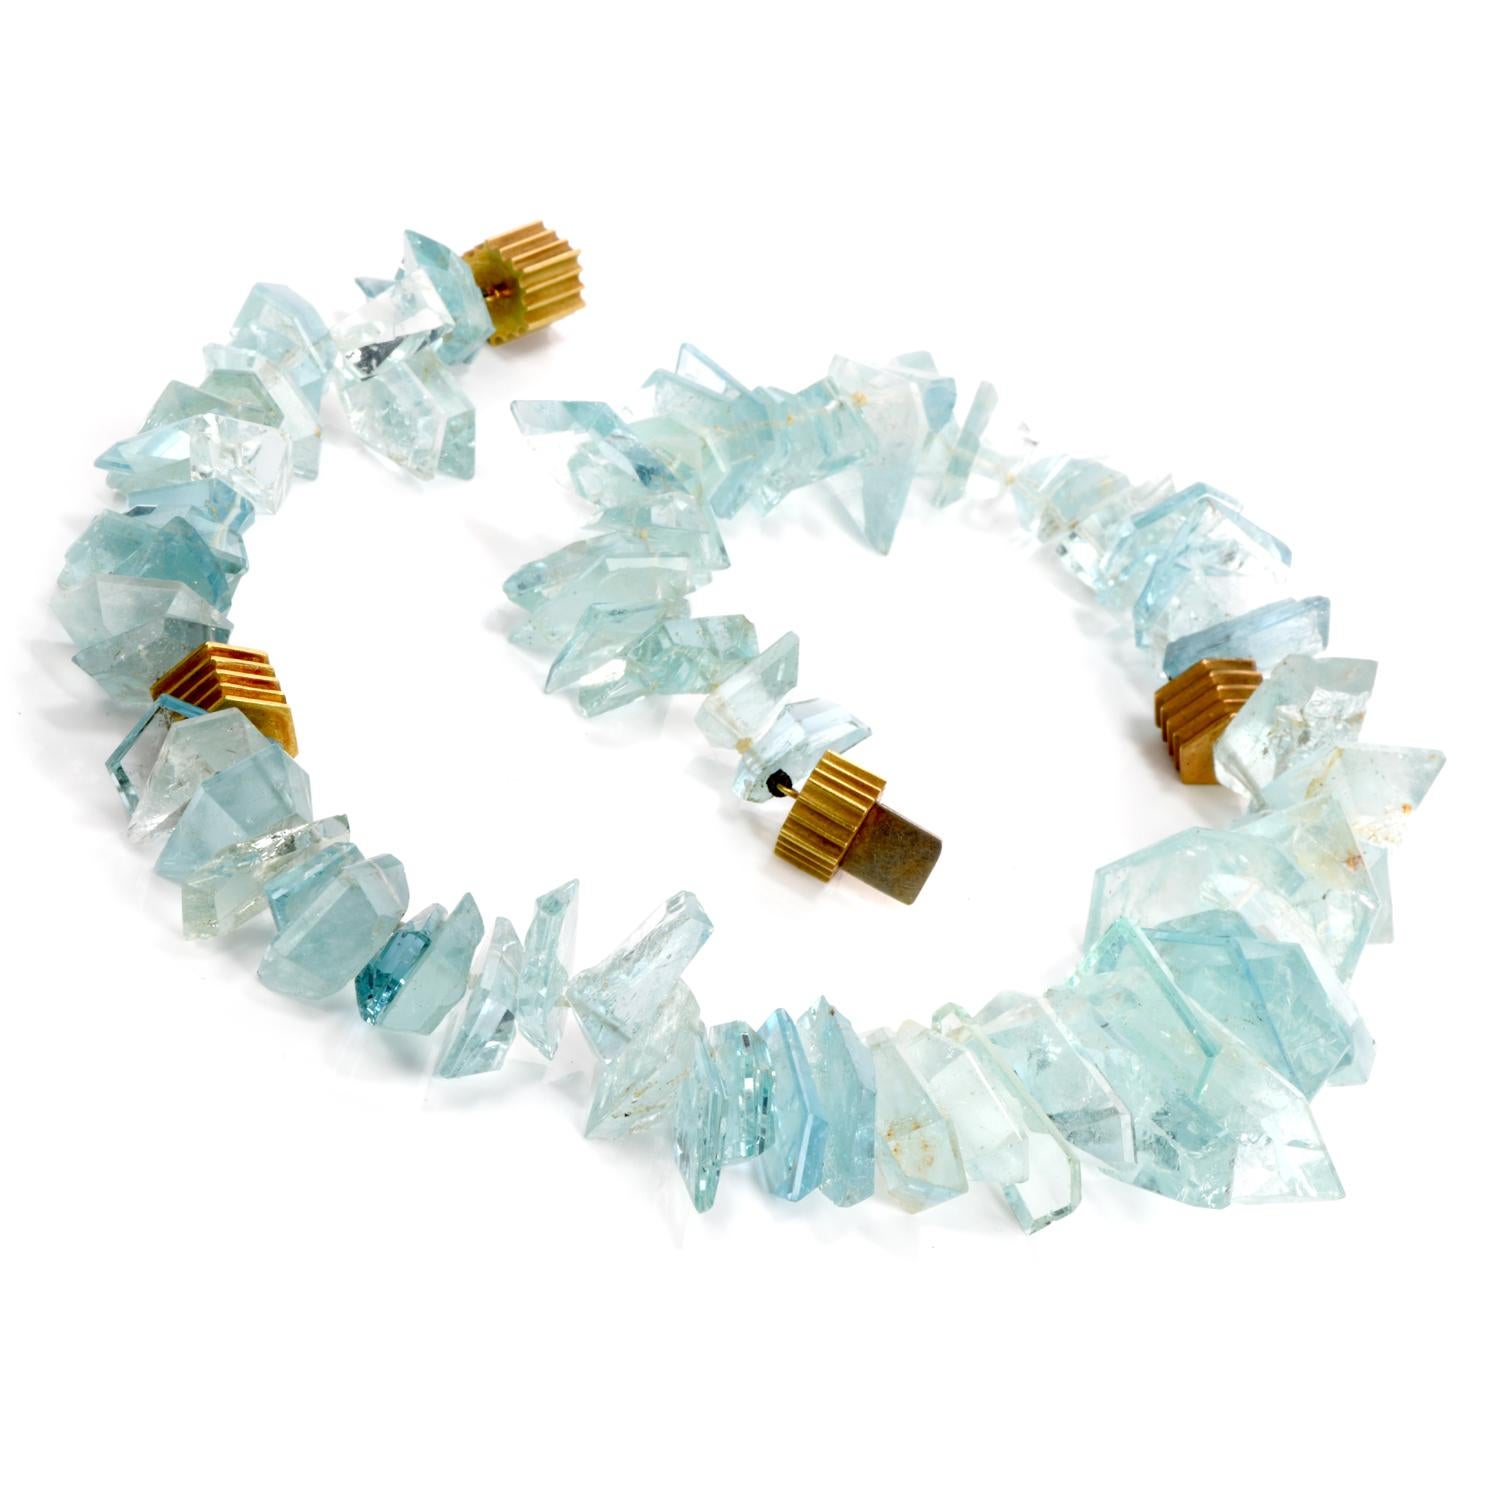 Aquamarine 18k gold necklace, design by Christopher Walling with Mirror-cut Natural aquamarine Gems. Necklace weighing  approx. 196.2 grams

 

DESIGNER: CHRISTOPHER WALLING 

MATERIAL: 18k Gold
GEMSTONE: Aquamarine over  Approx. 800.00